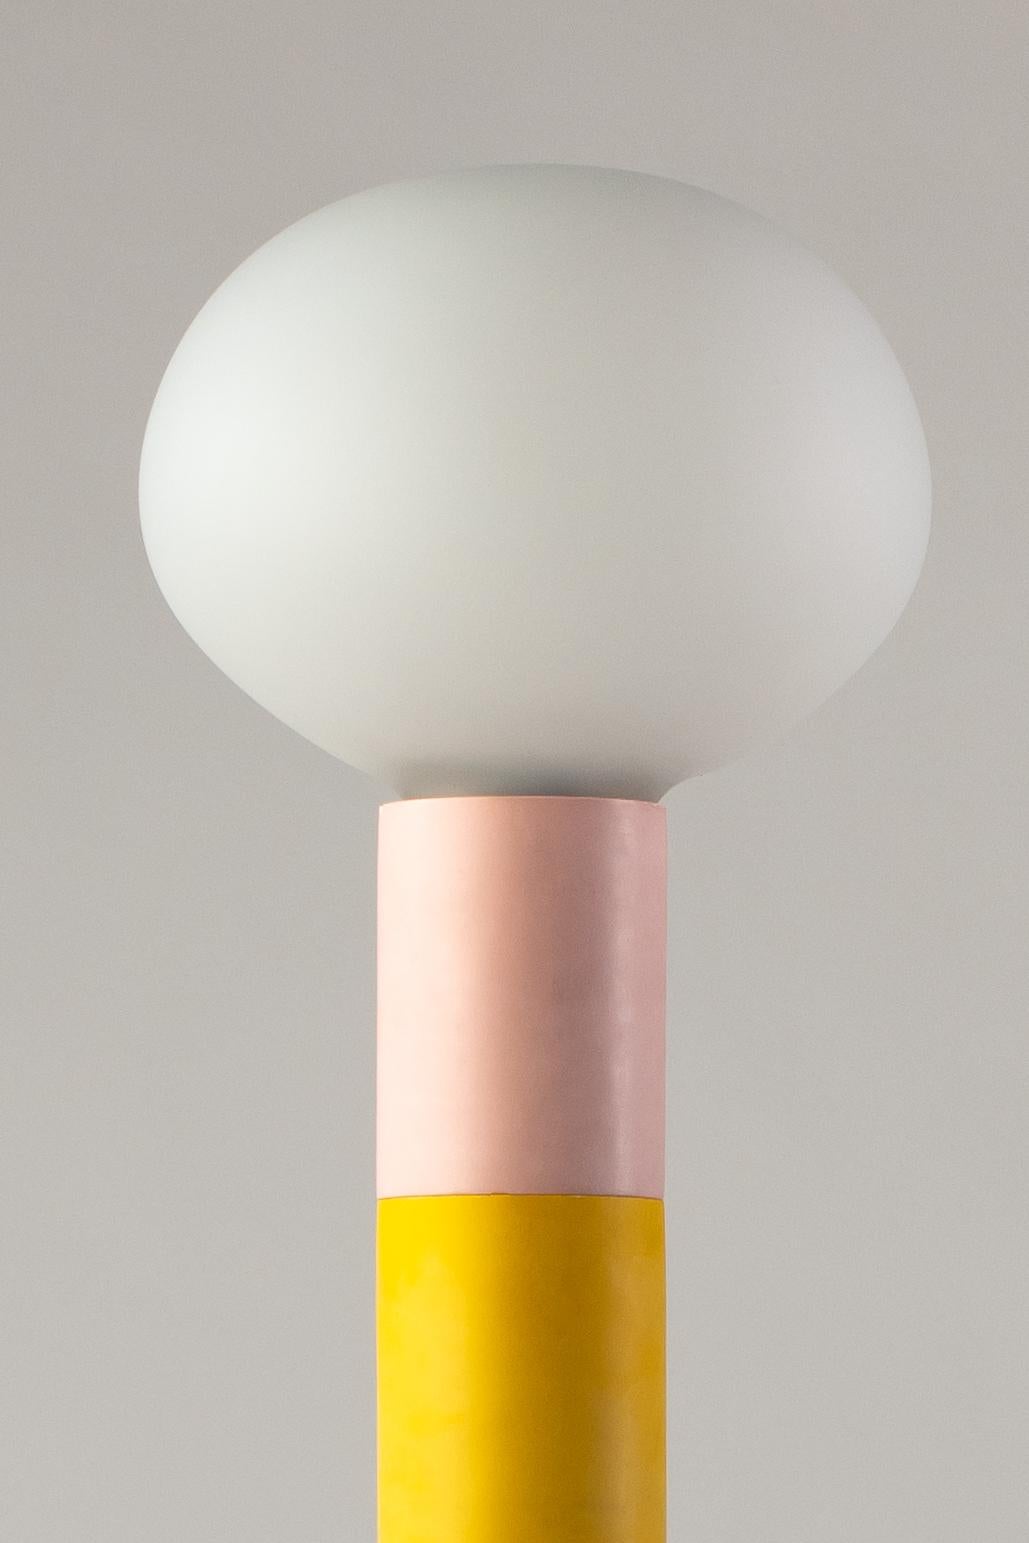 Post-Modern Ciluzio Lisa by AAMA Design / Modular Pop Floor Lamp Made by Hand in France For Sale